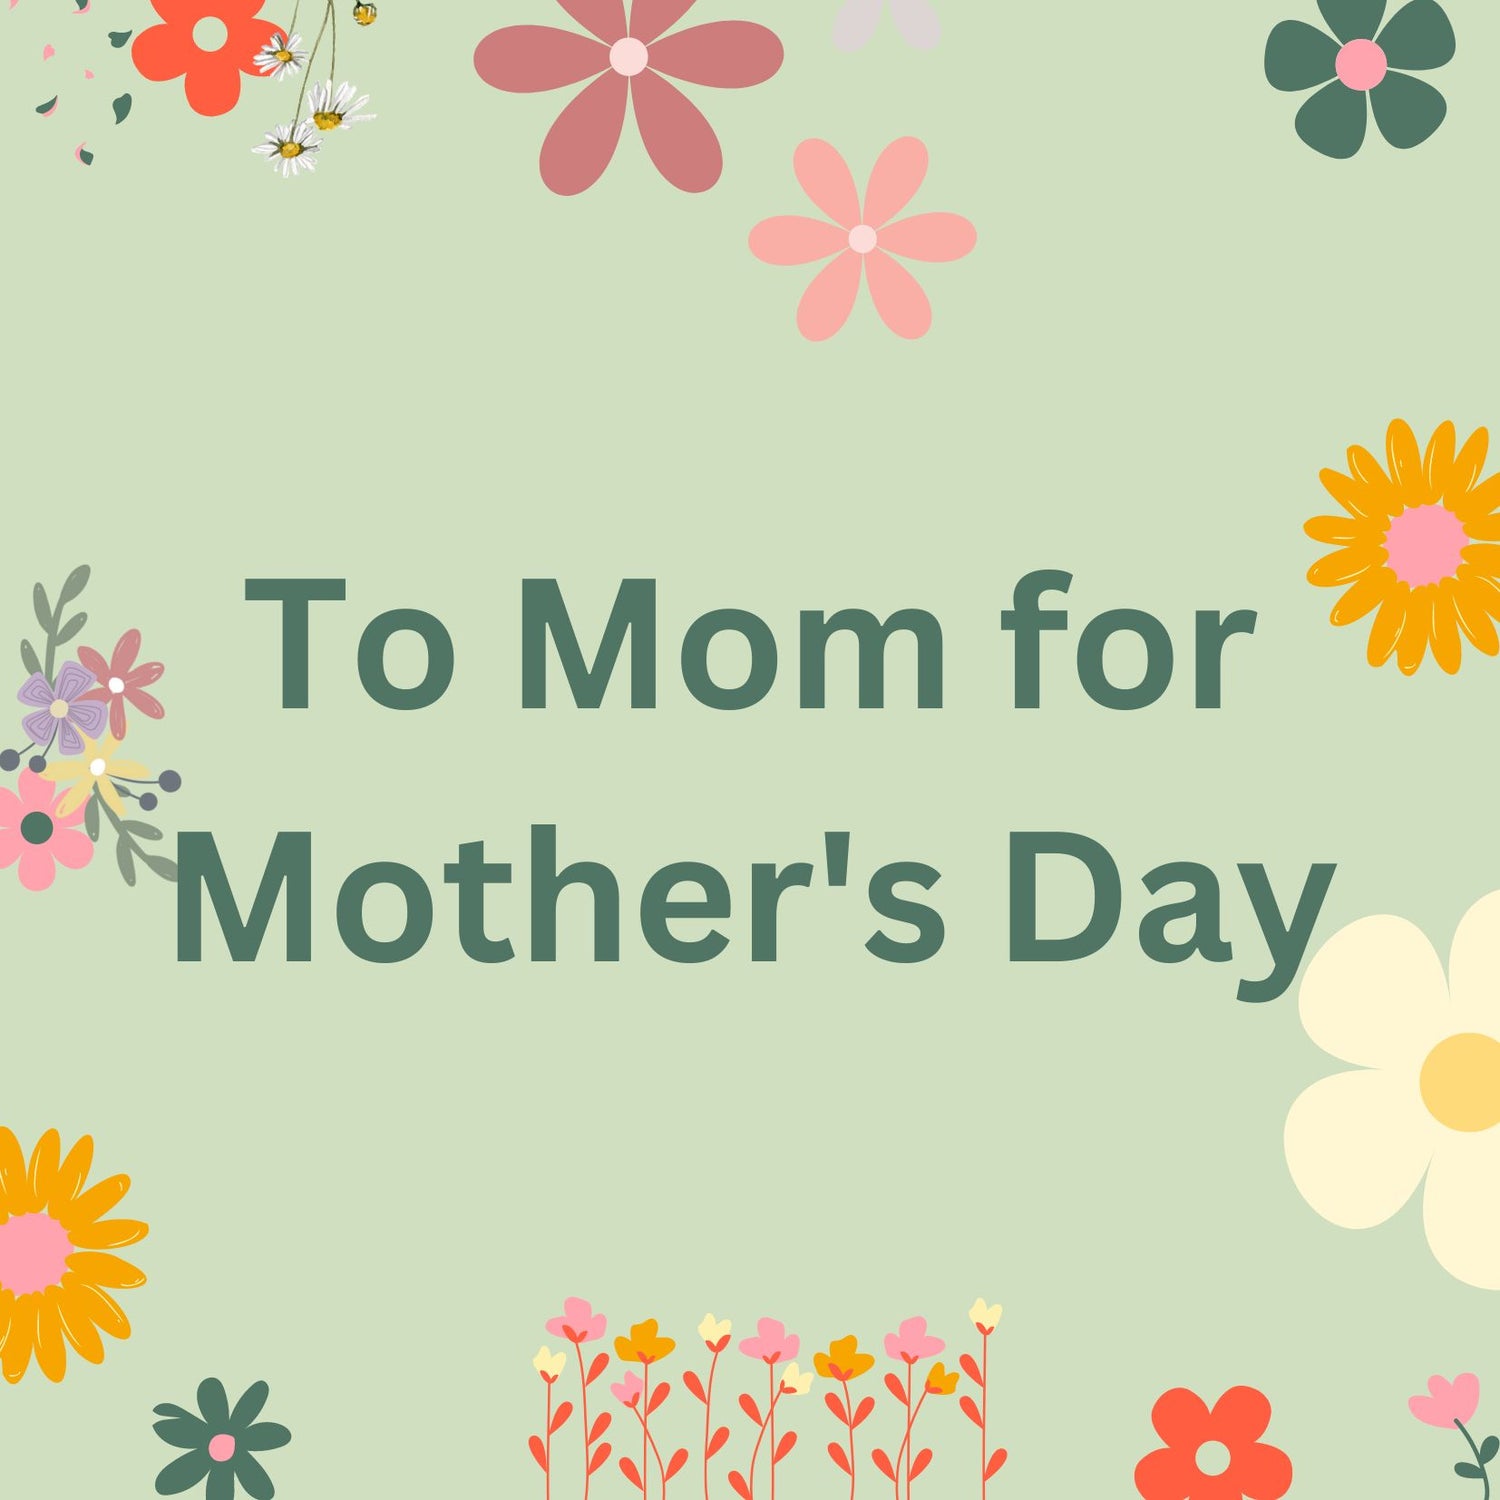 To Mom for Mother's Day